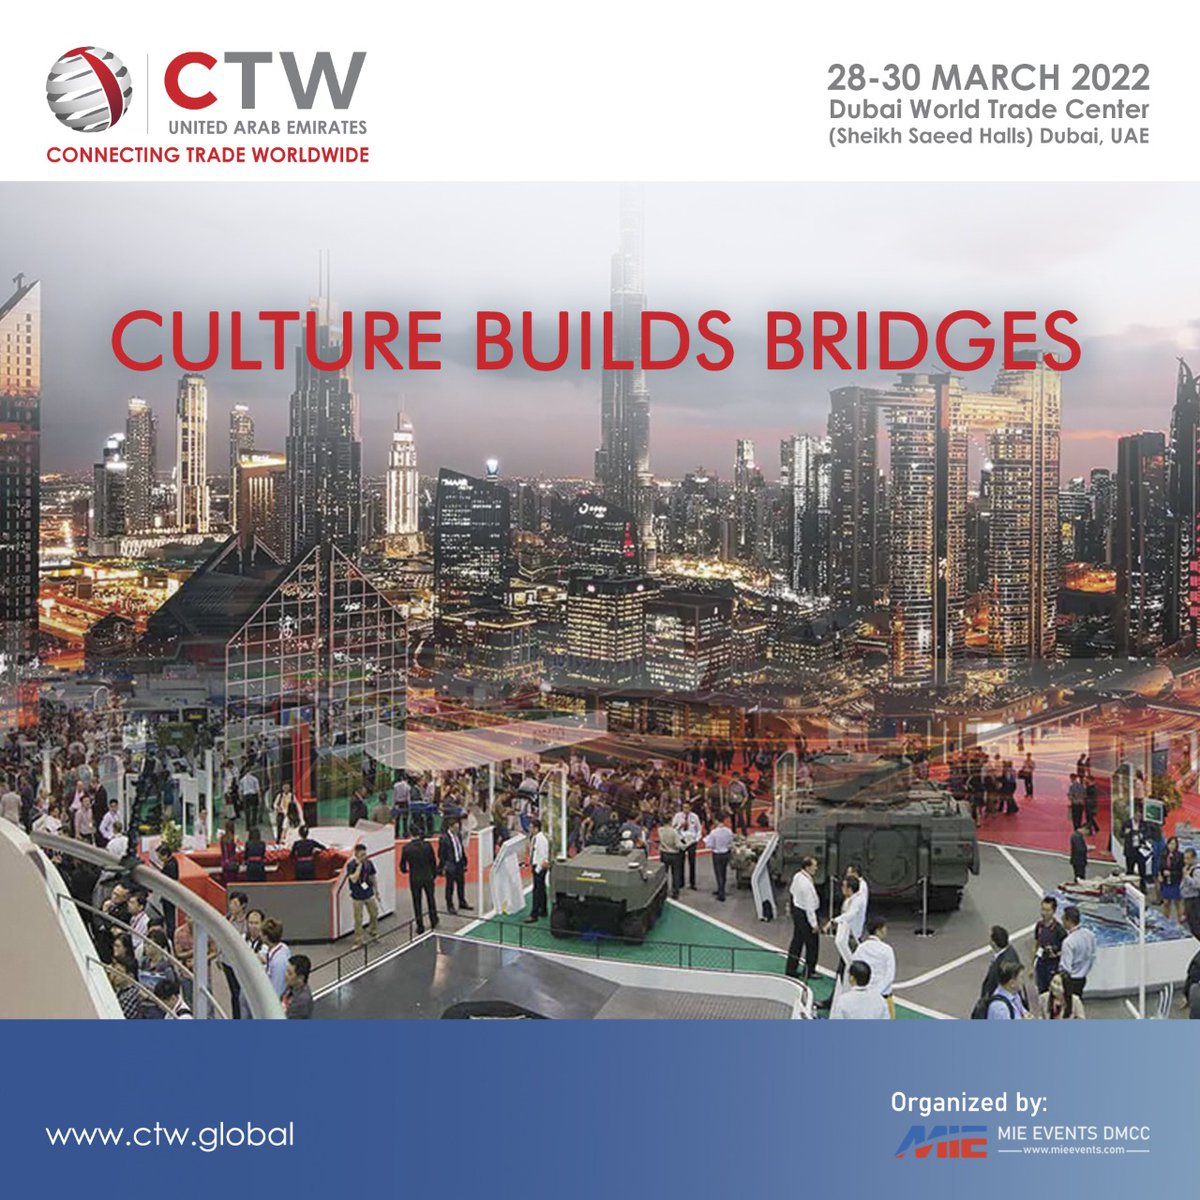 We believe that culture makes each country unique and at CTW UAE 2022, we are all about culture. Come find products such as jewelry, handicrafts, embroidery, and so much more. 

#CTW2022 #GlobalTradeShow #GlobalTradeConnect #B2BMarketPlace #TradeExpo #Businesses  #FDI #LiveEvents